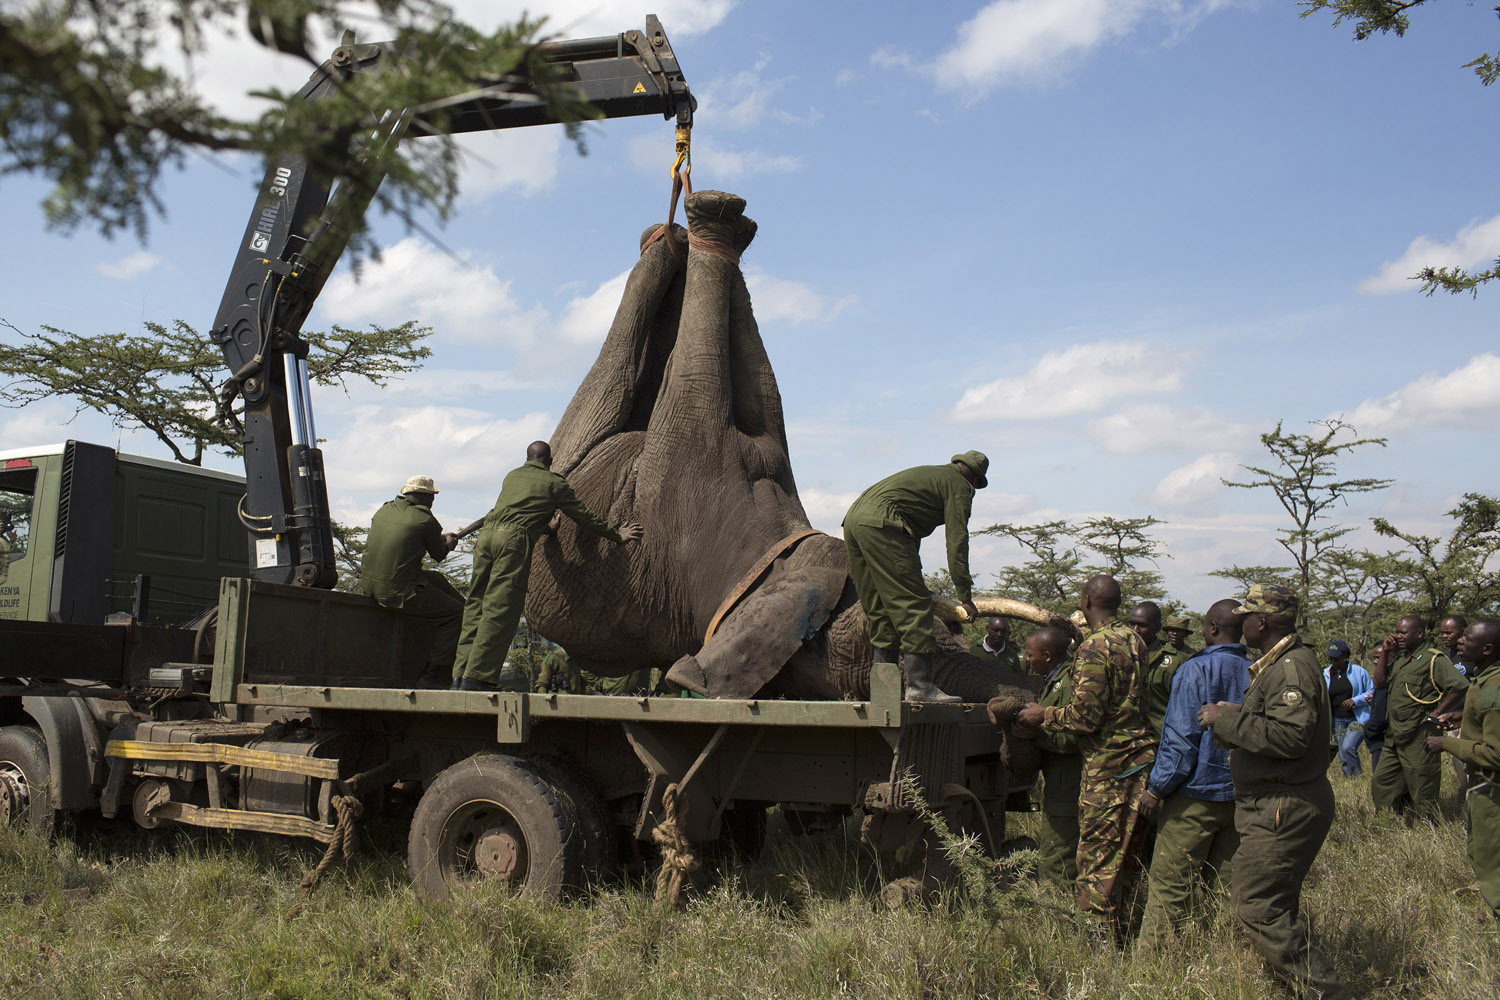 KWS wardens secure a sedated elephant on the back of a truck during a relocation exercise on the margins of the Ol Pejeta conservancy in central Kenya